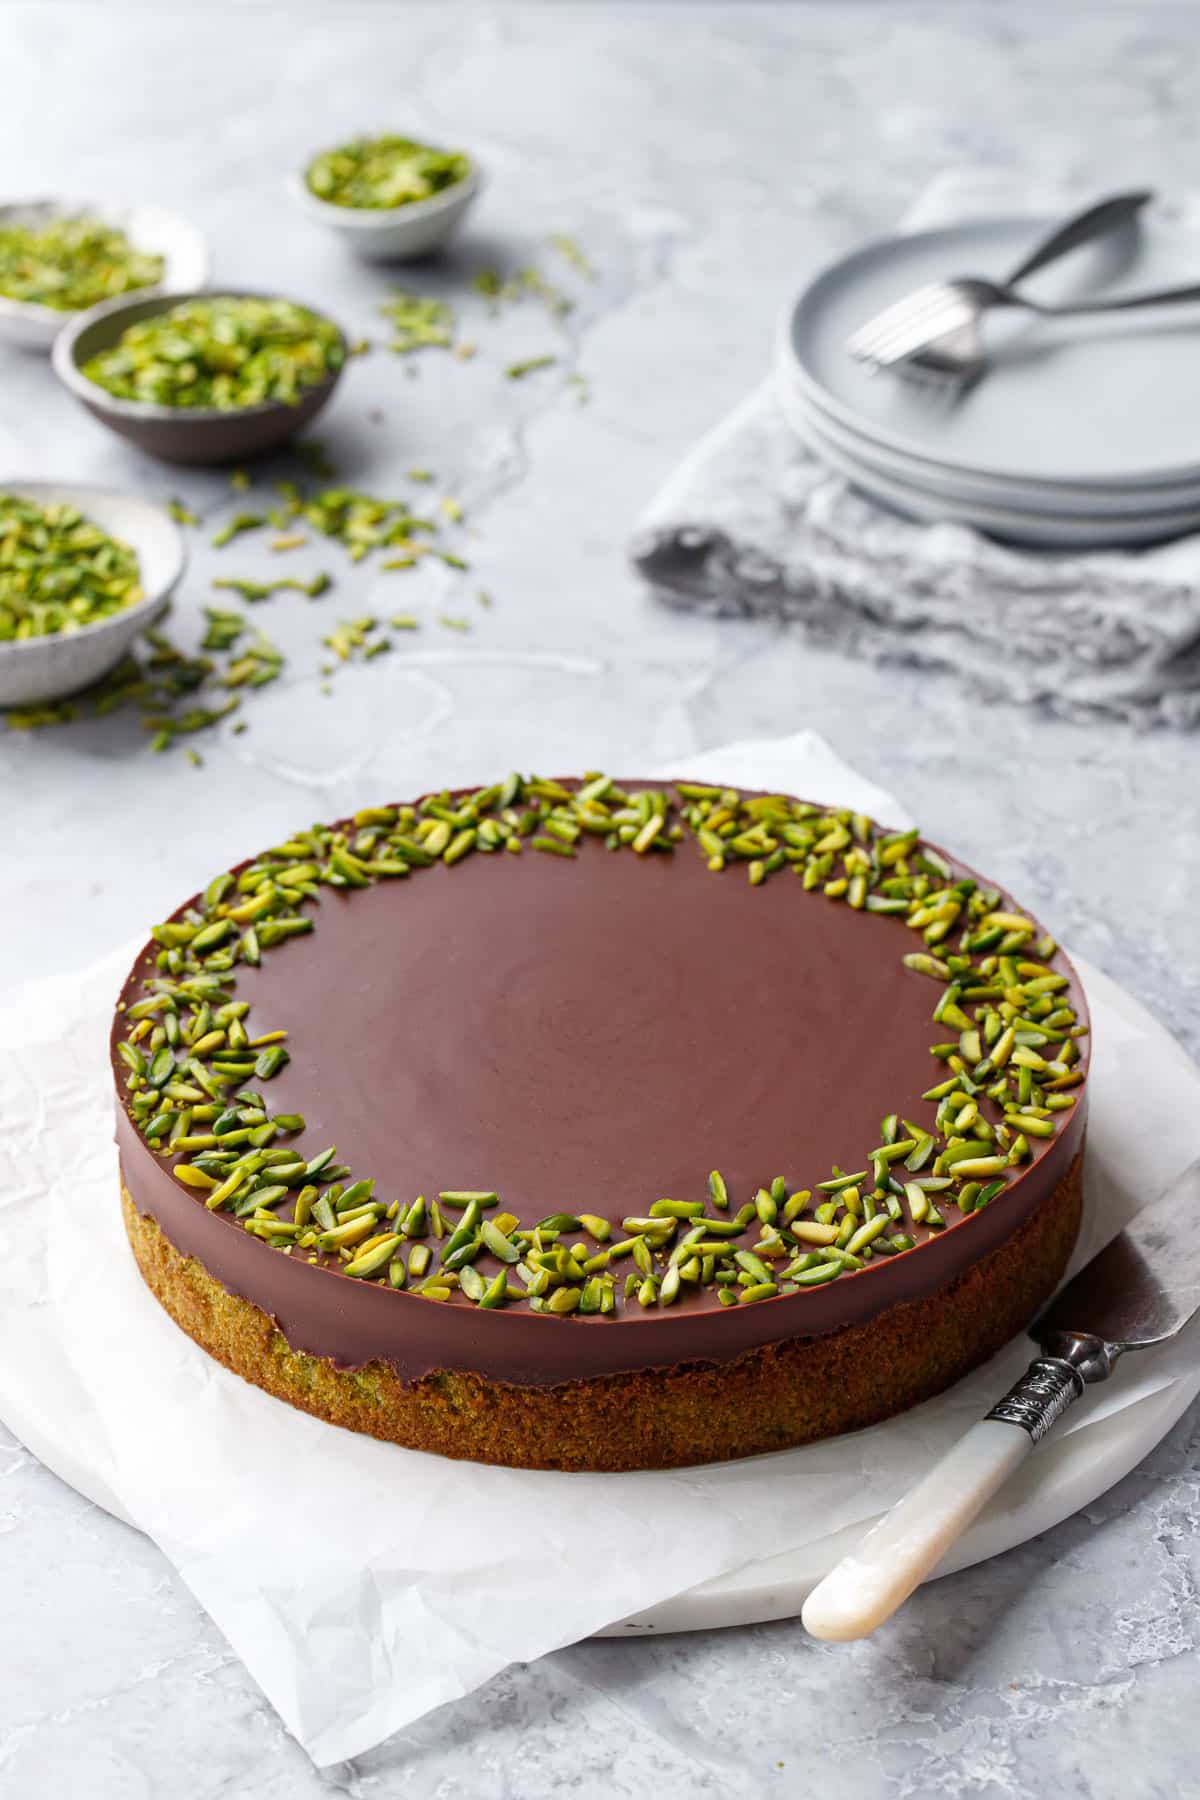 Flourless Pistachio Cake topped with a smooth layer of Chocolate Ganache and a border of bright green slivered pistachios, on a plate with cake server, bowls of pistachios in the background.